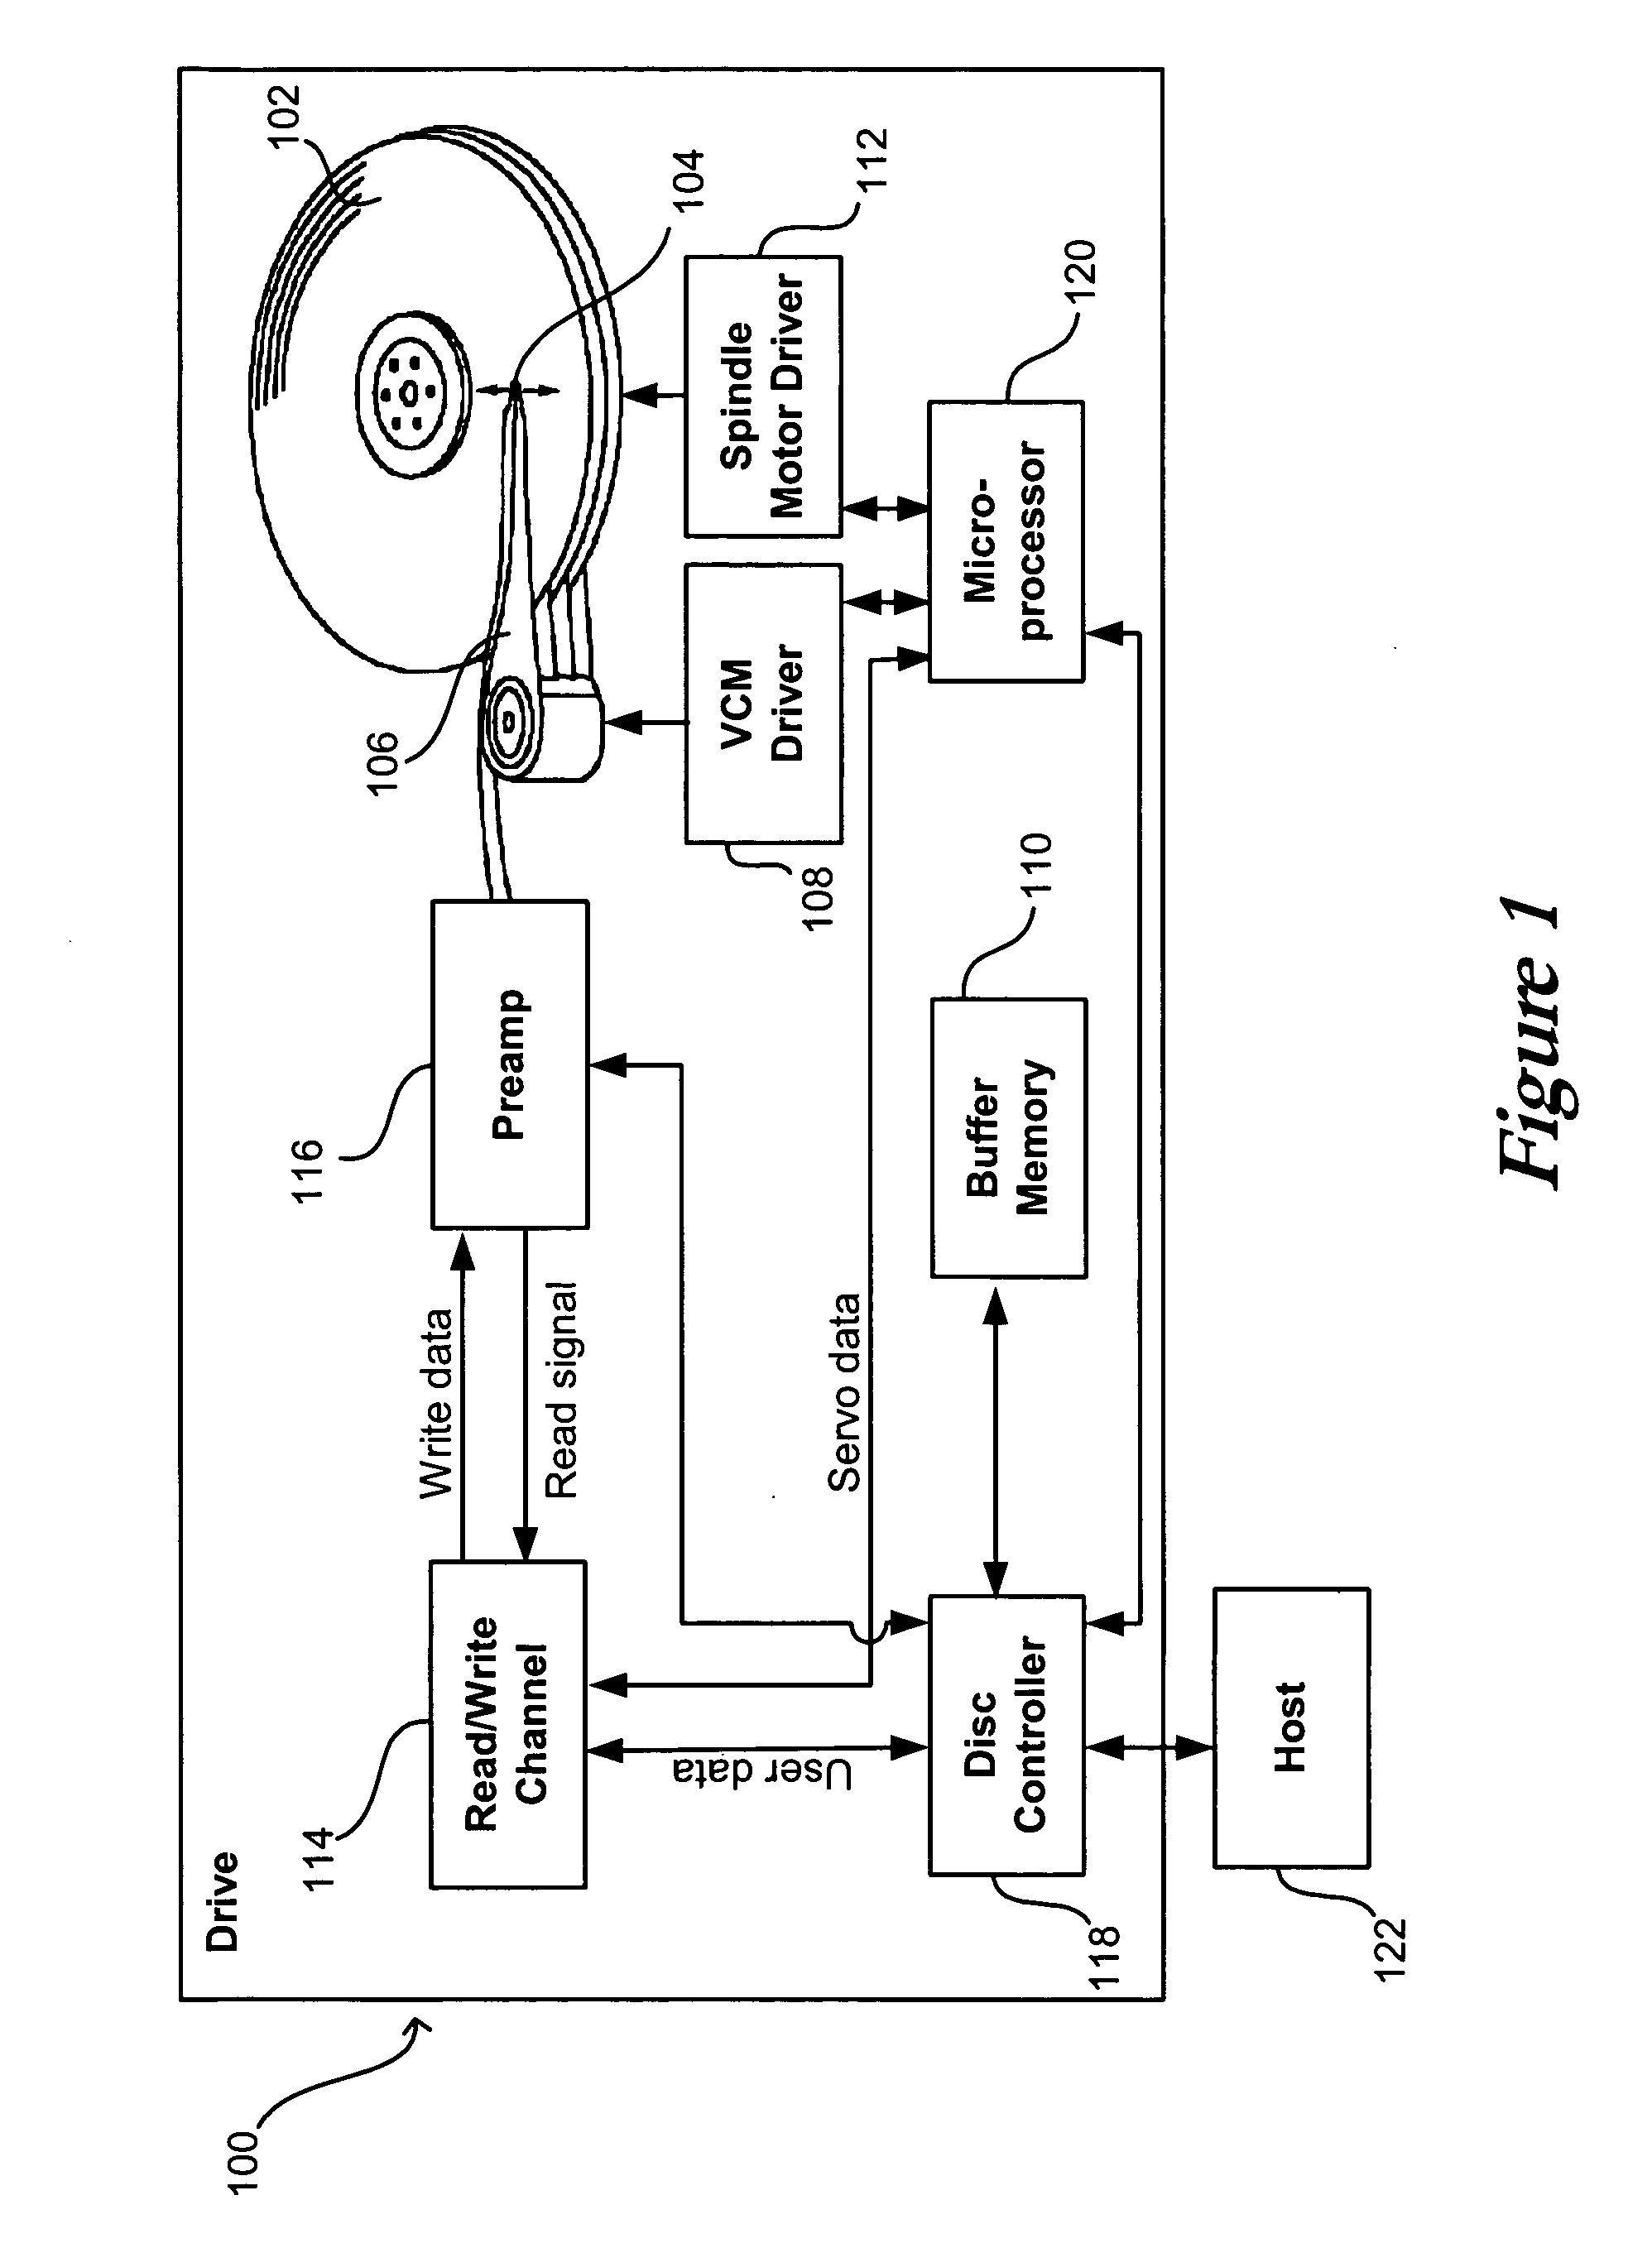 Methods for variable multi-pass servowriting and self-servowriting